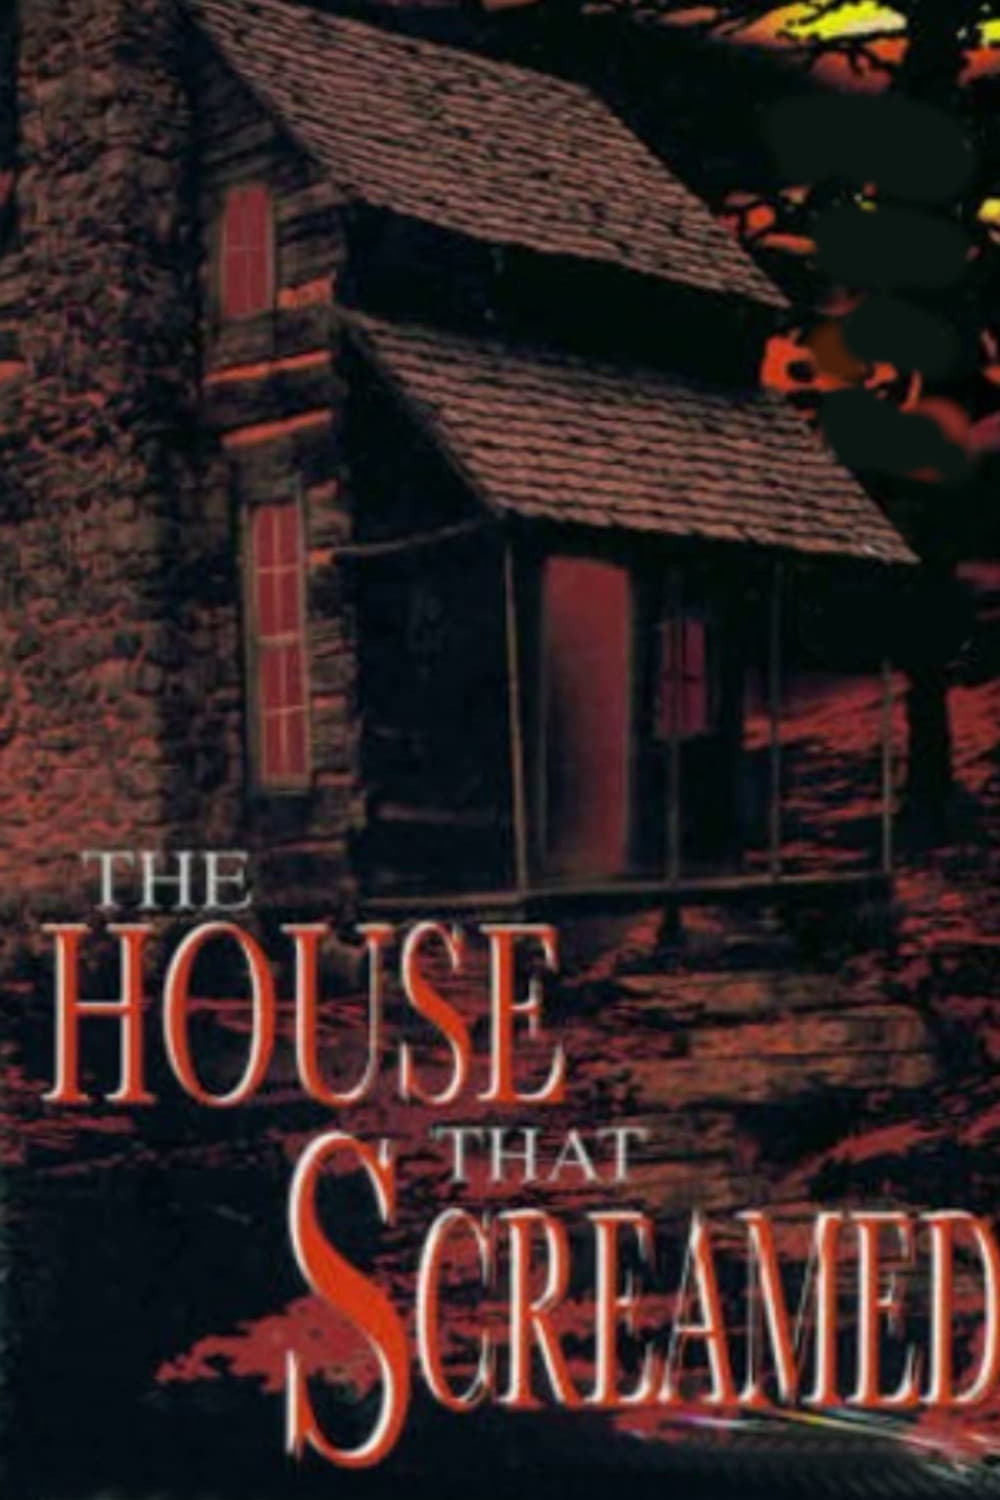 The House That Screamed (2000)